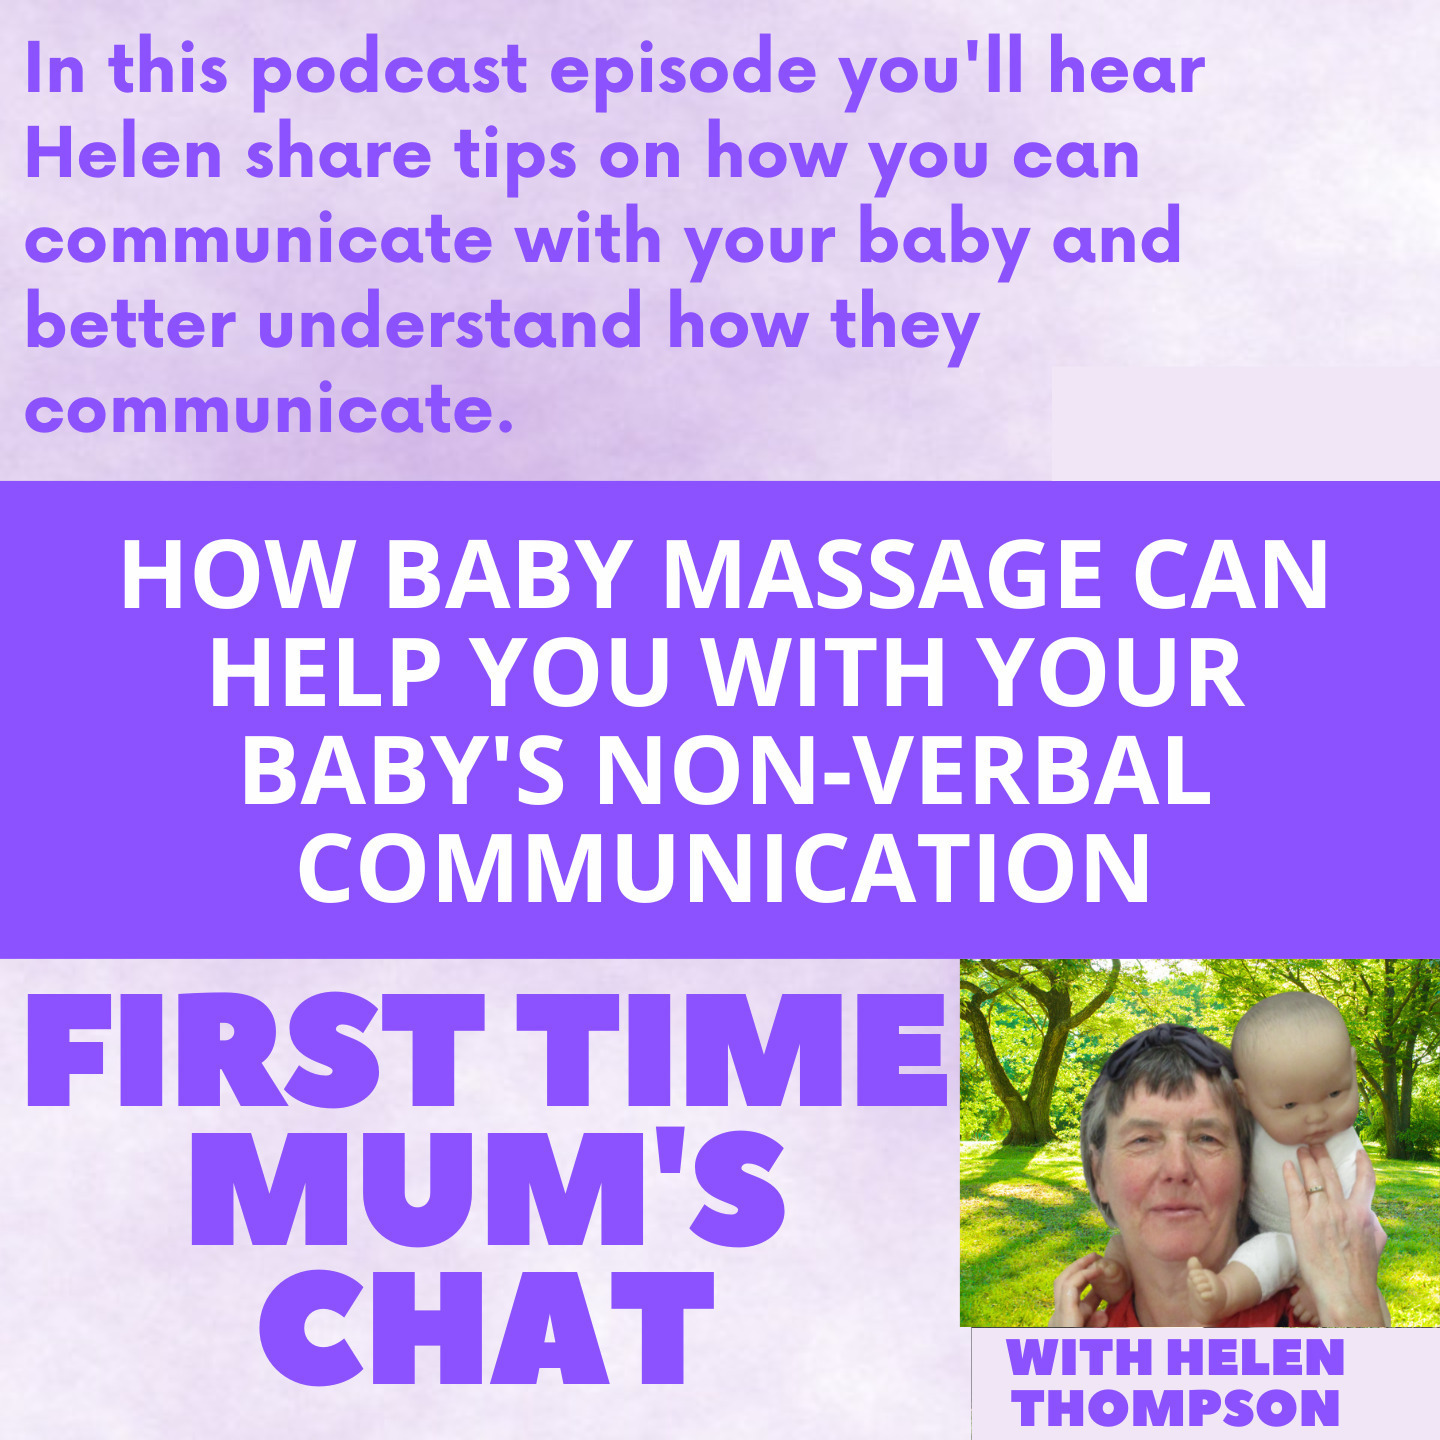 How Can Baby Massage Help You With Your Baby’s Non-Verbal Communication